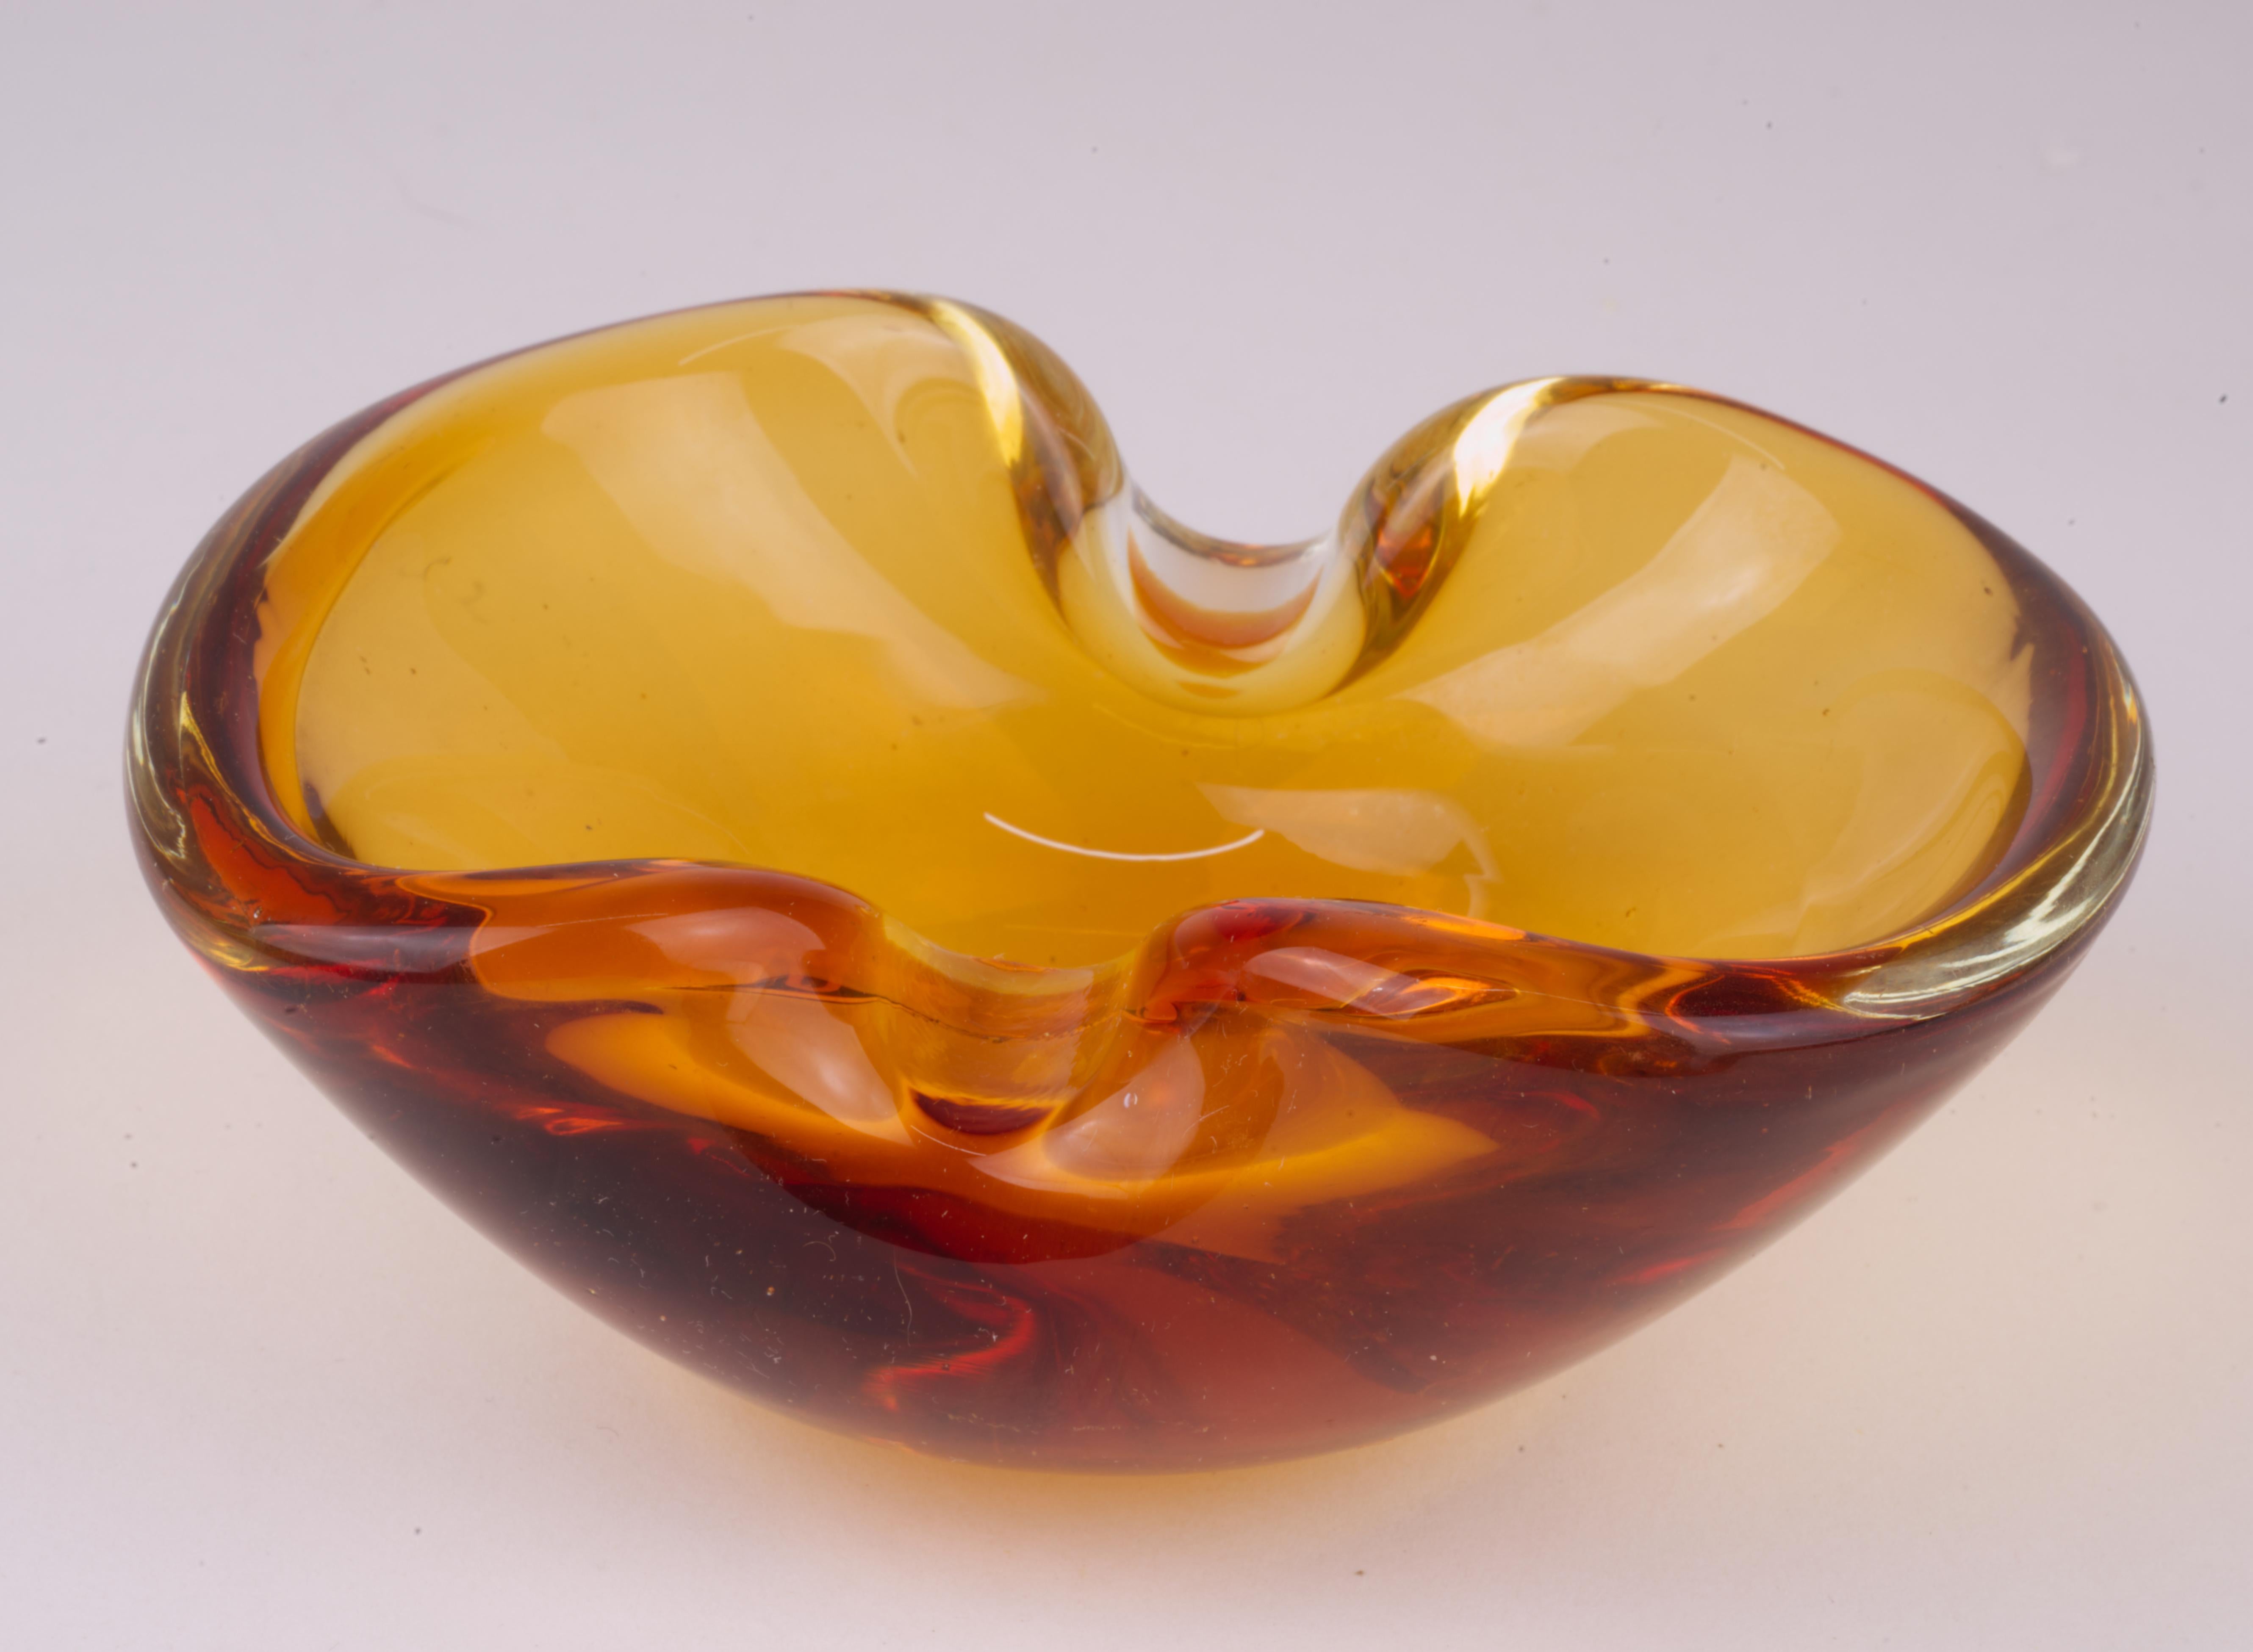  Geode bowl or dish was hand blown in sommerso technique with amber colored glass encased in layer of clear glass in Murano, Italy. 

The bowl is not signed; similar bowls in this style were made by several artists, including Archimede Seguso and